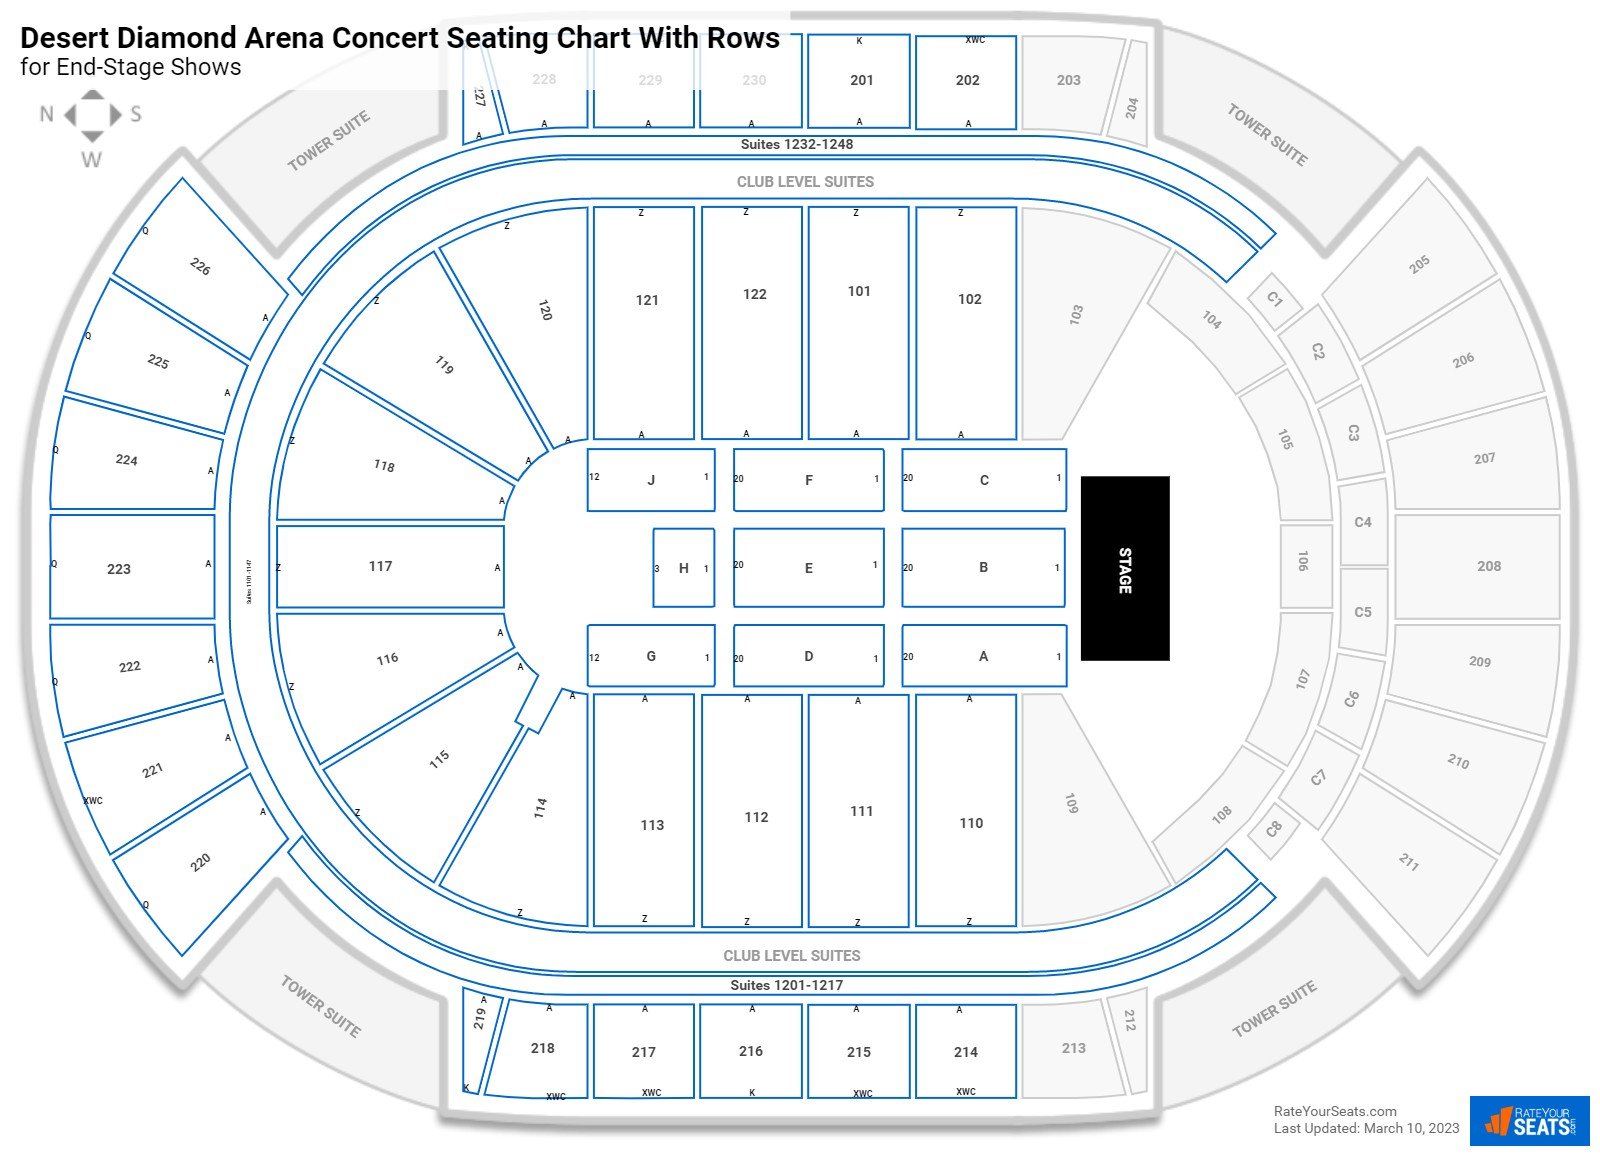 Desert Diamond Arena seating chart with row numbers